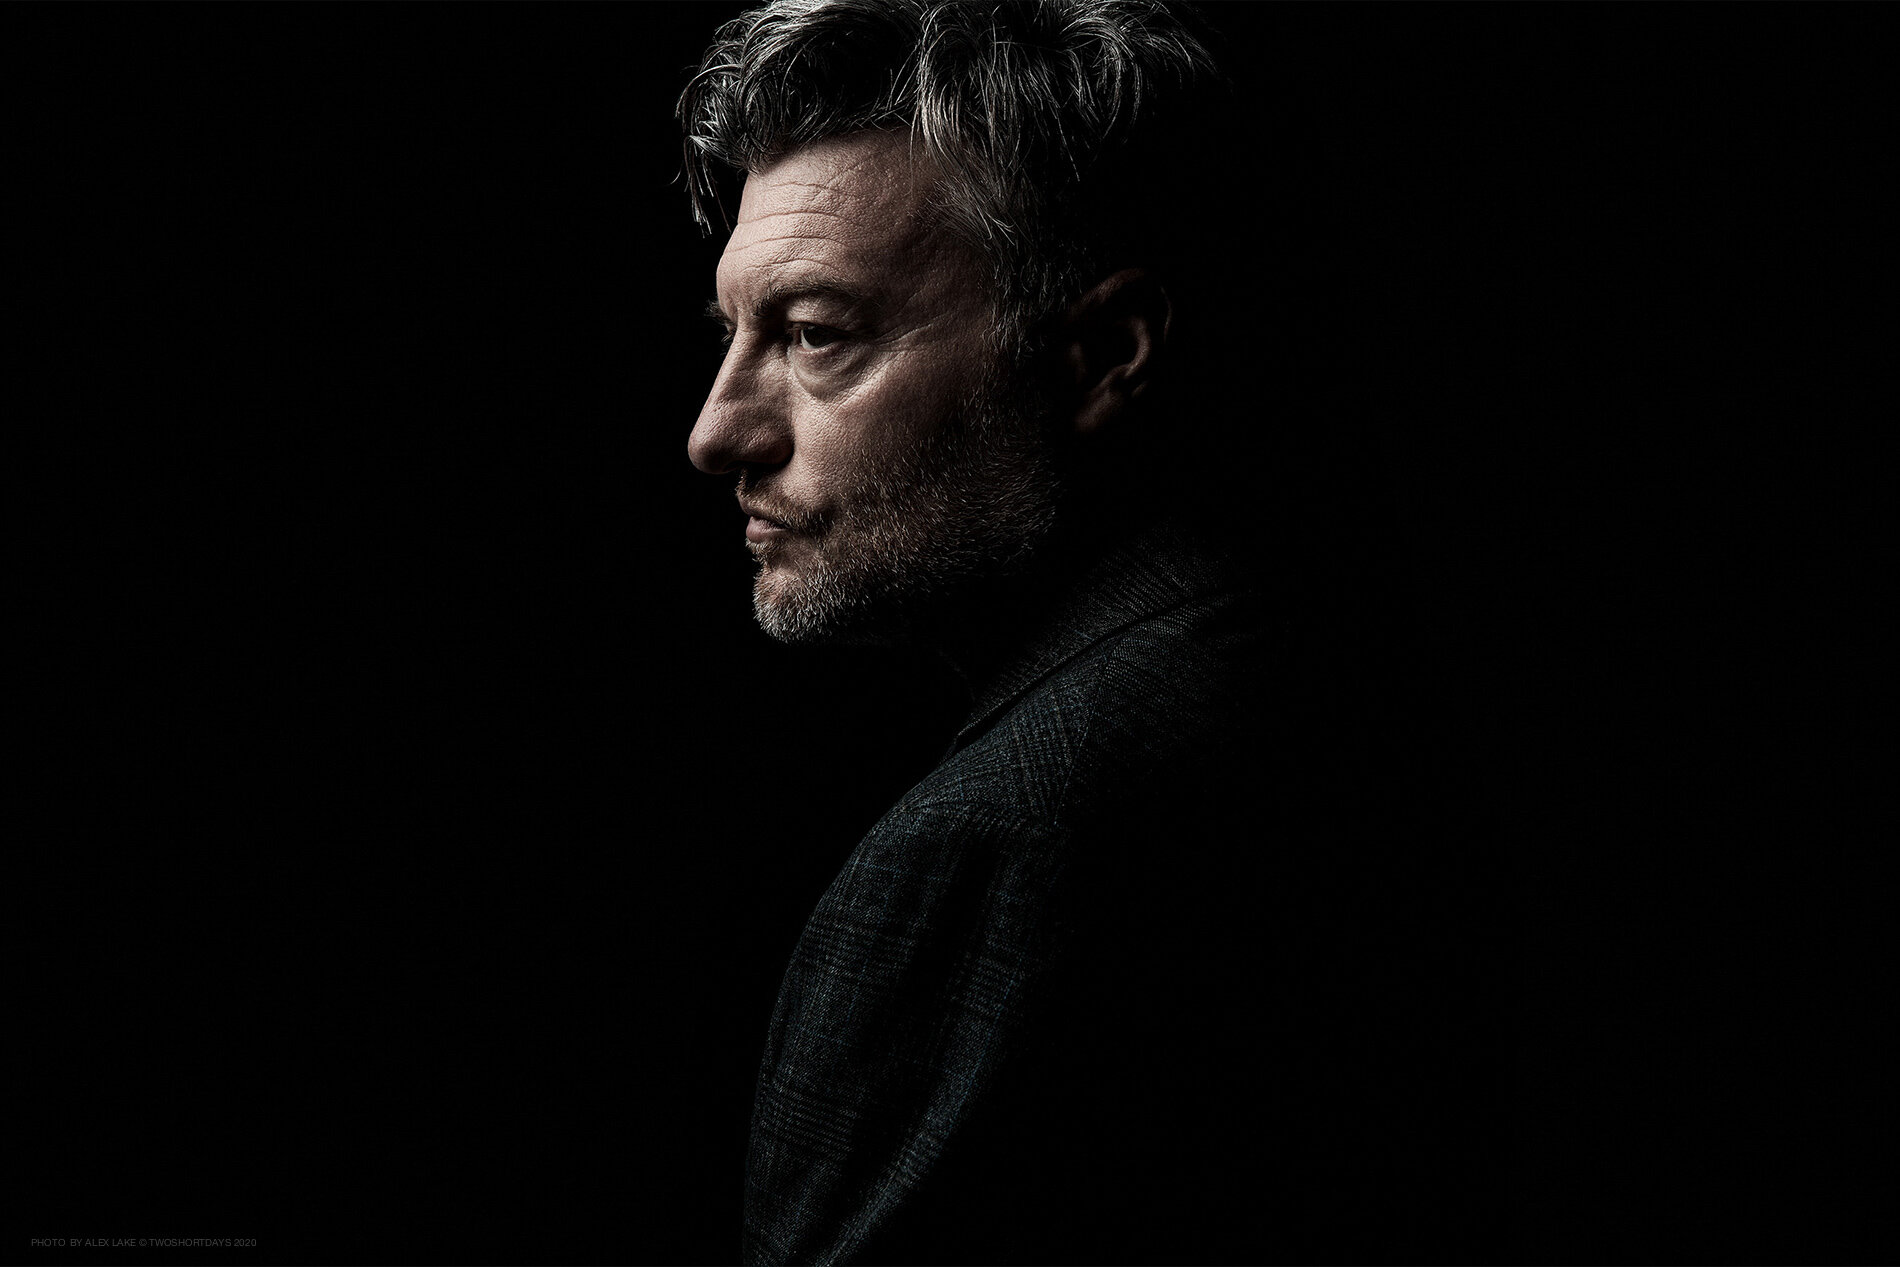 charlie_brooker_photography_copyright_ALEX_LAKE_do_not_reproduce_without_permission_TWOSHORTDAYS.jpg